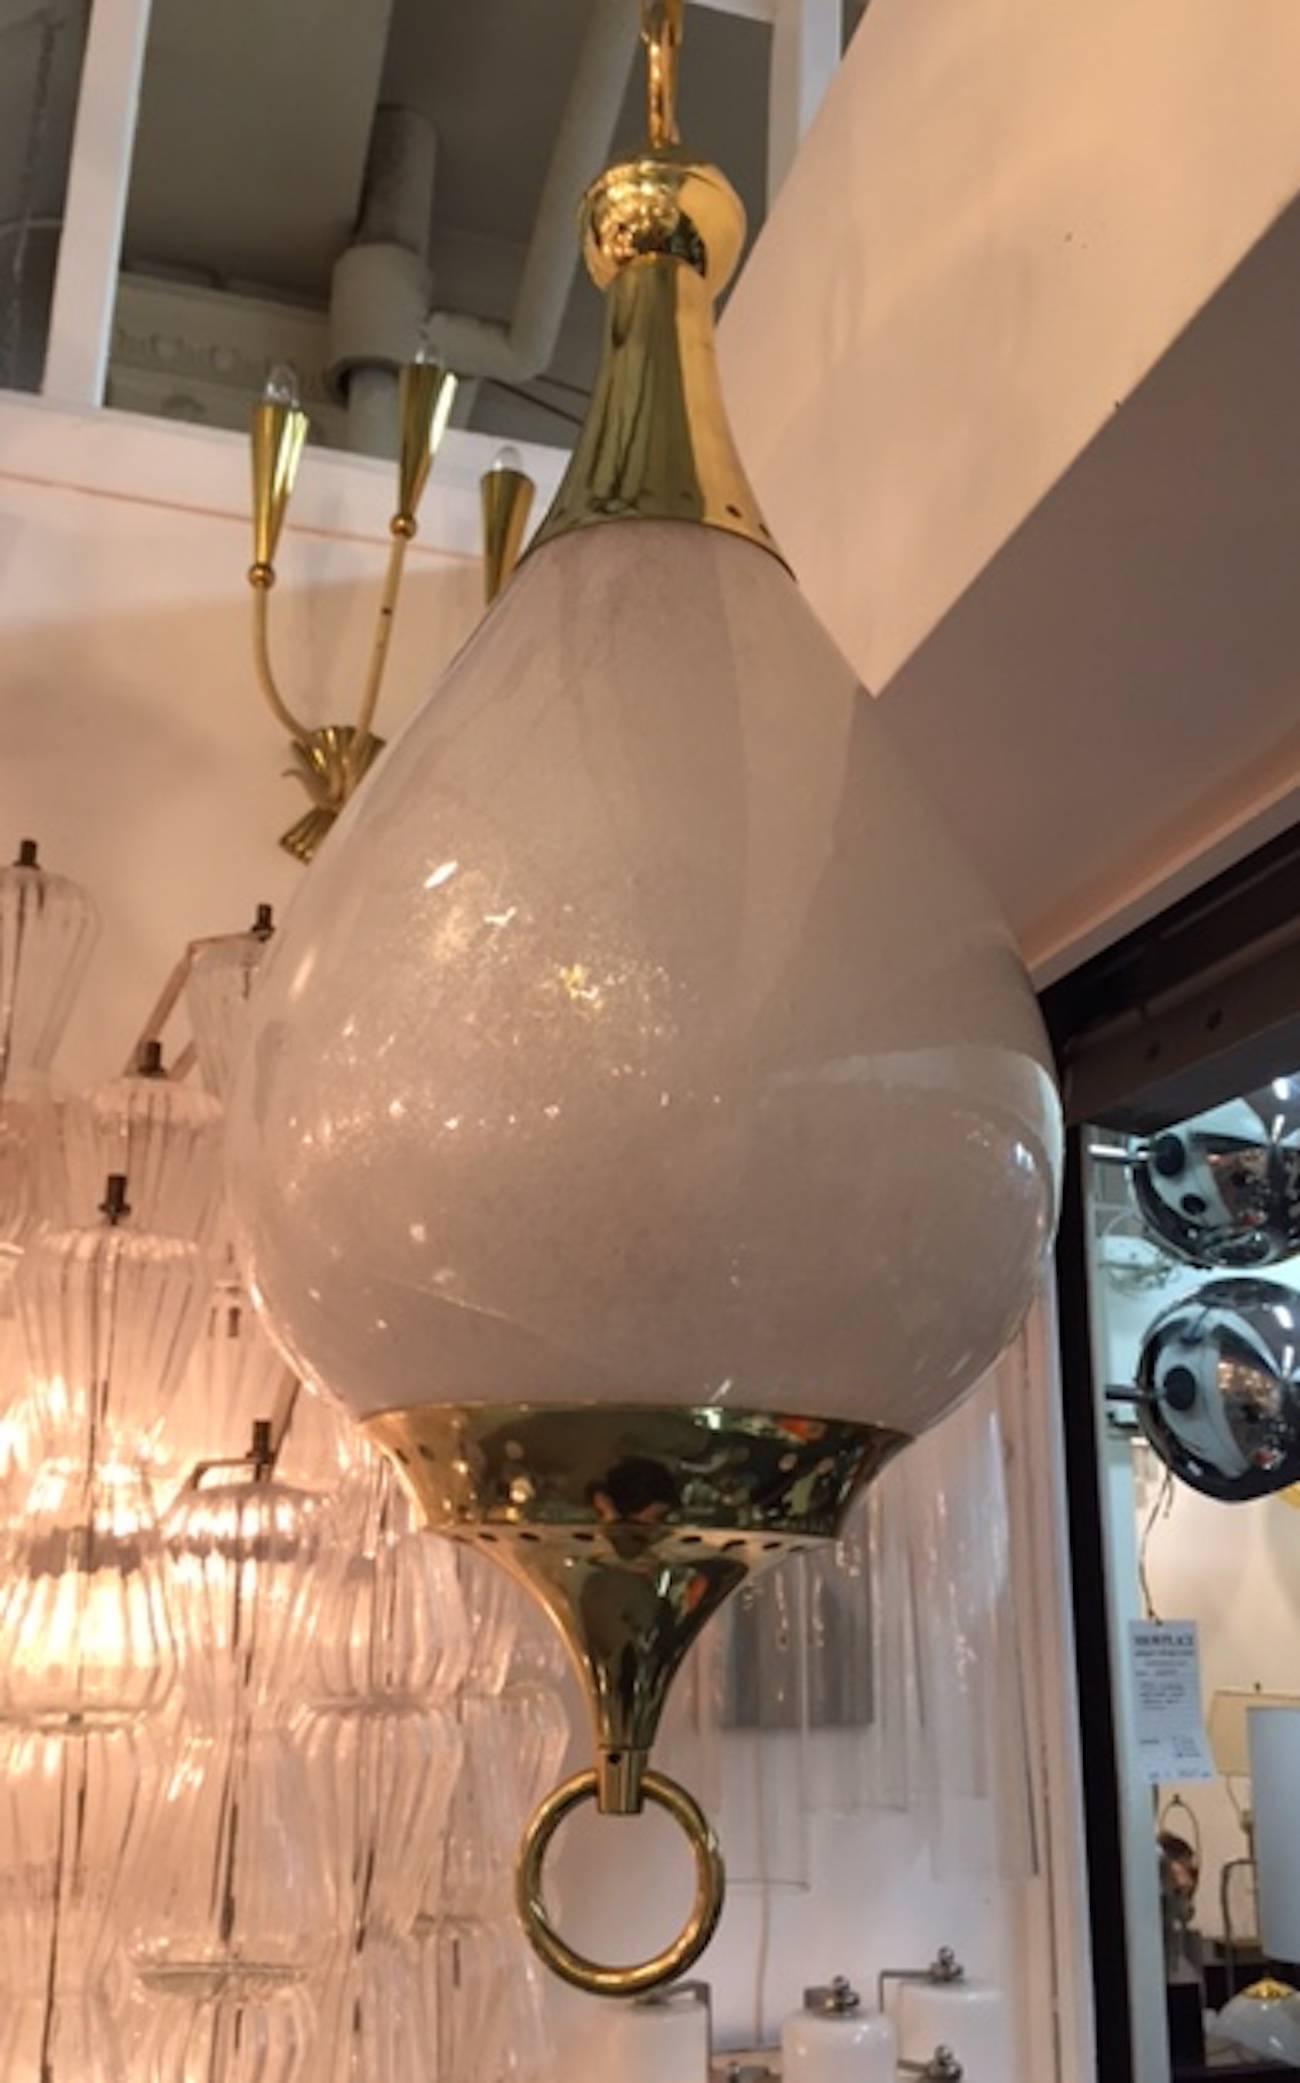 A lovely 1950s drop shape pendant light. The shade is handblown Pulegoso glass. Pulegoso is Italian for many bubbles. The top and bottom mounts are beautifully made with a pierced dot boarder for light to shine through as well matching decorative